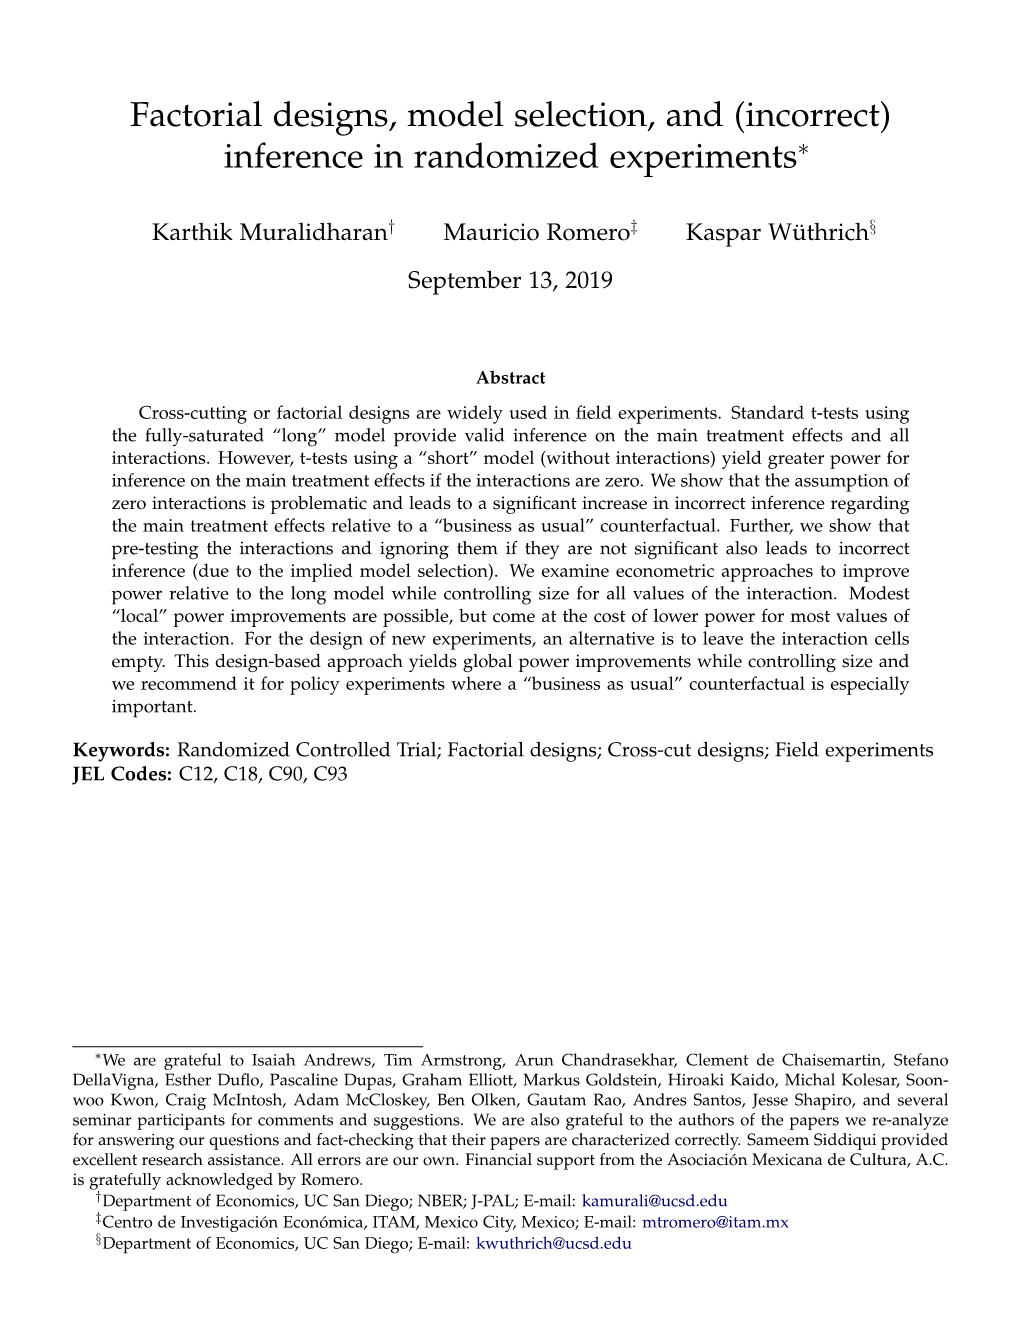 Factorial Designs, Model Selection, and (Incorrect) Inference in Randomized Experiments∗